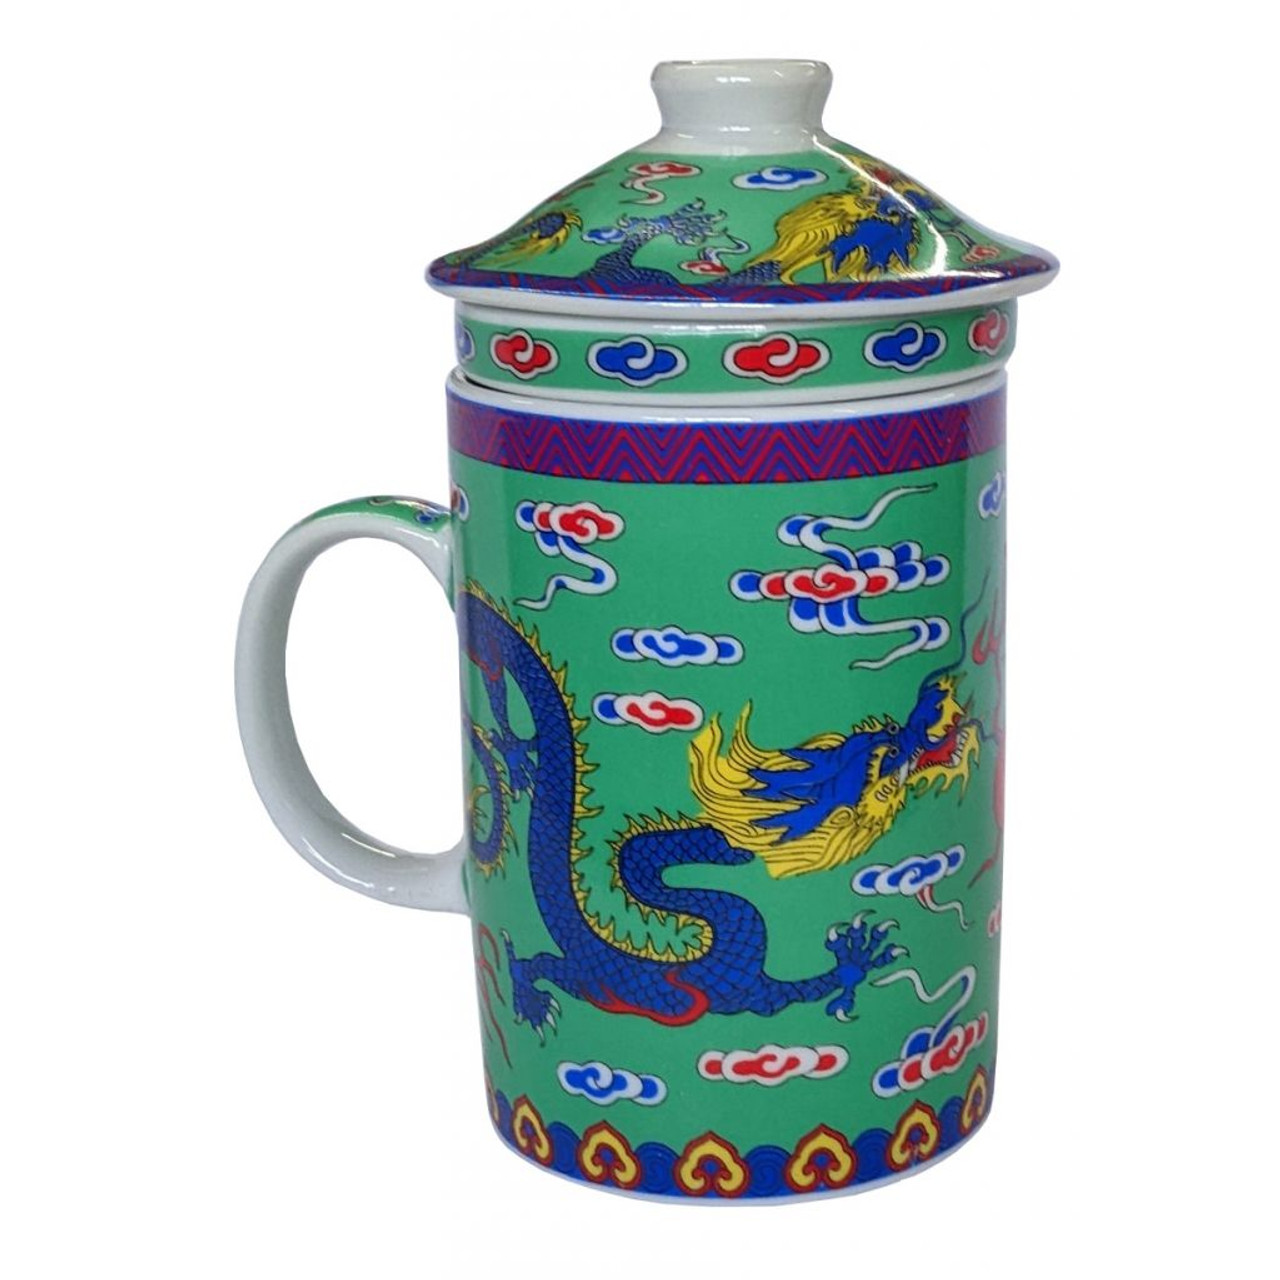 Porcelain Chinese Tea Mug with Infuser and Lid - Green Dragon Pattern